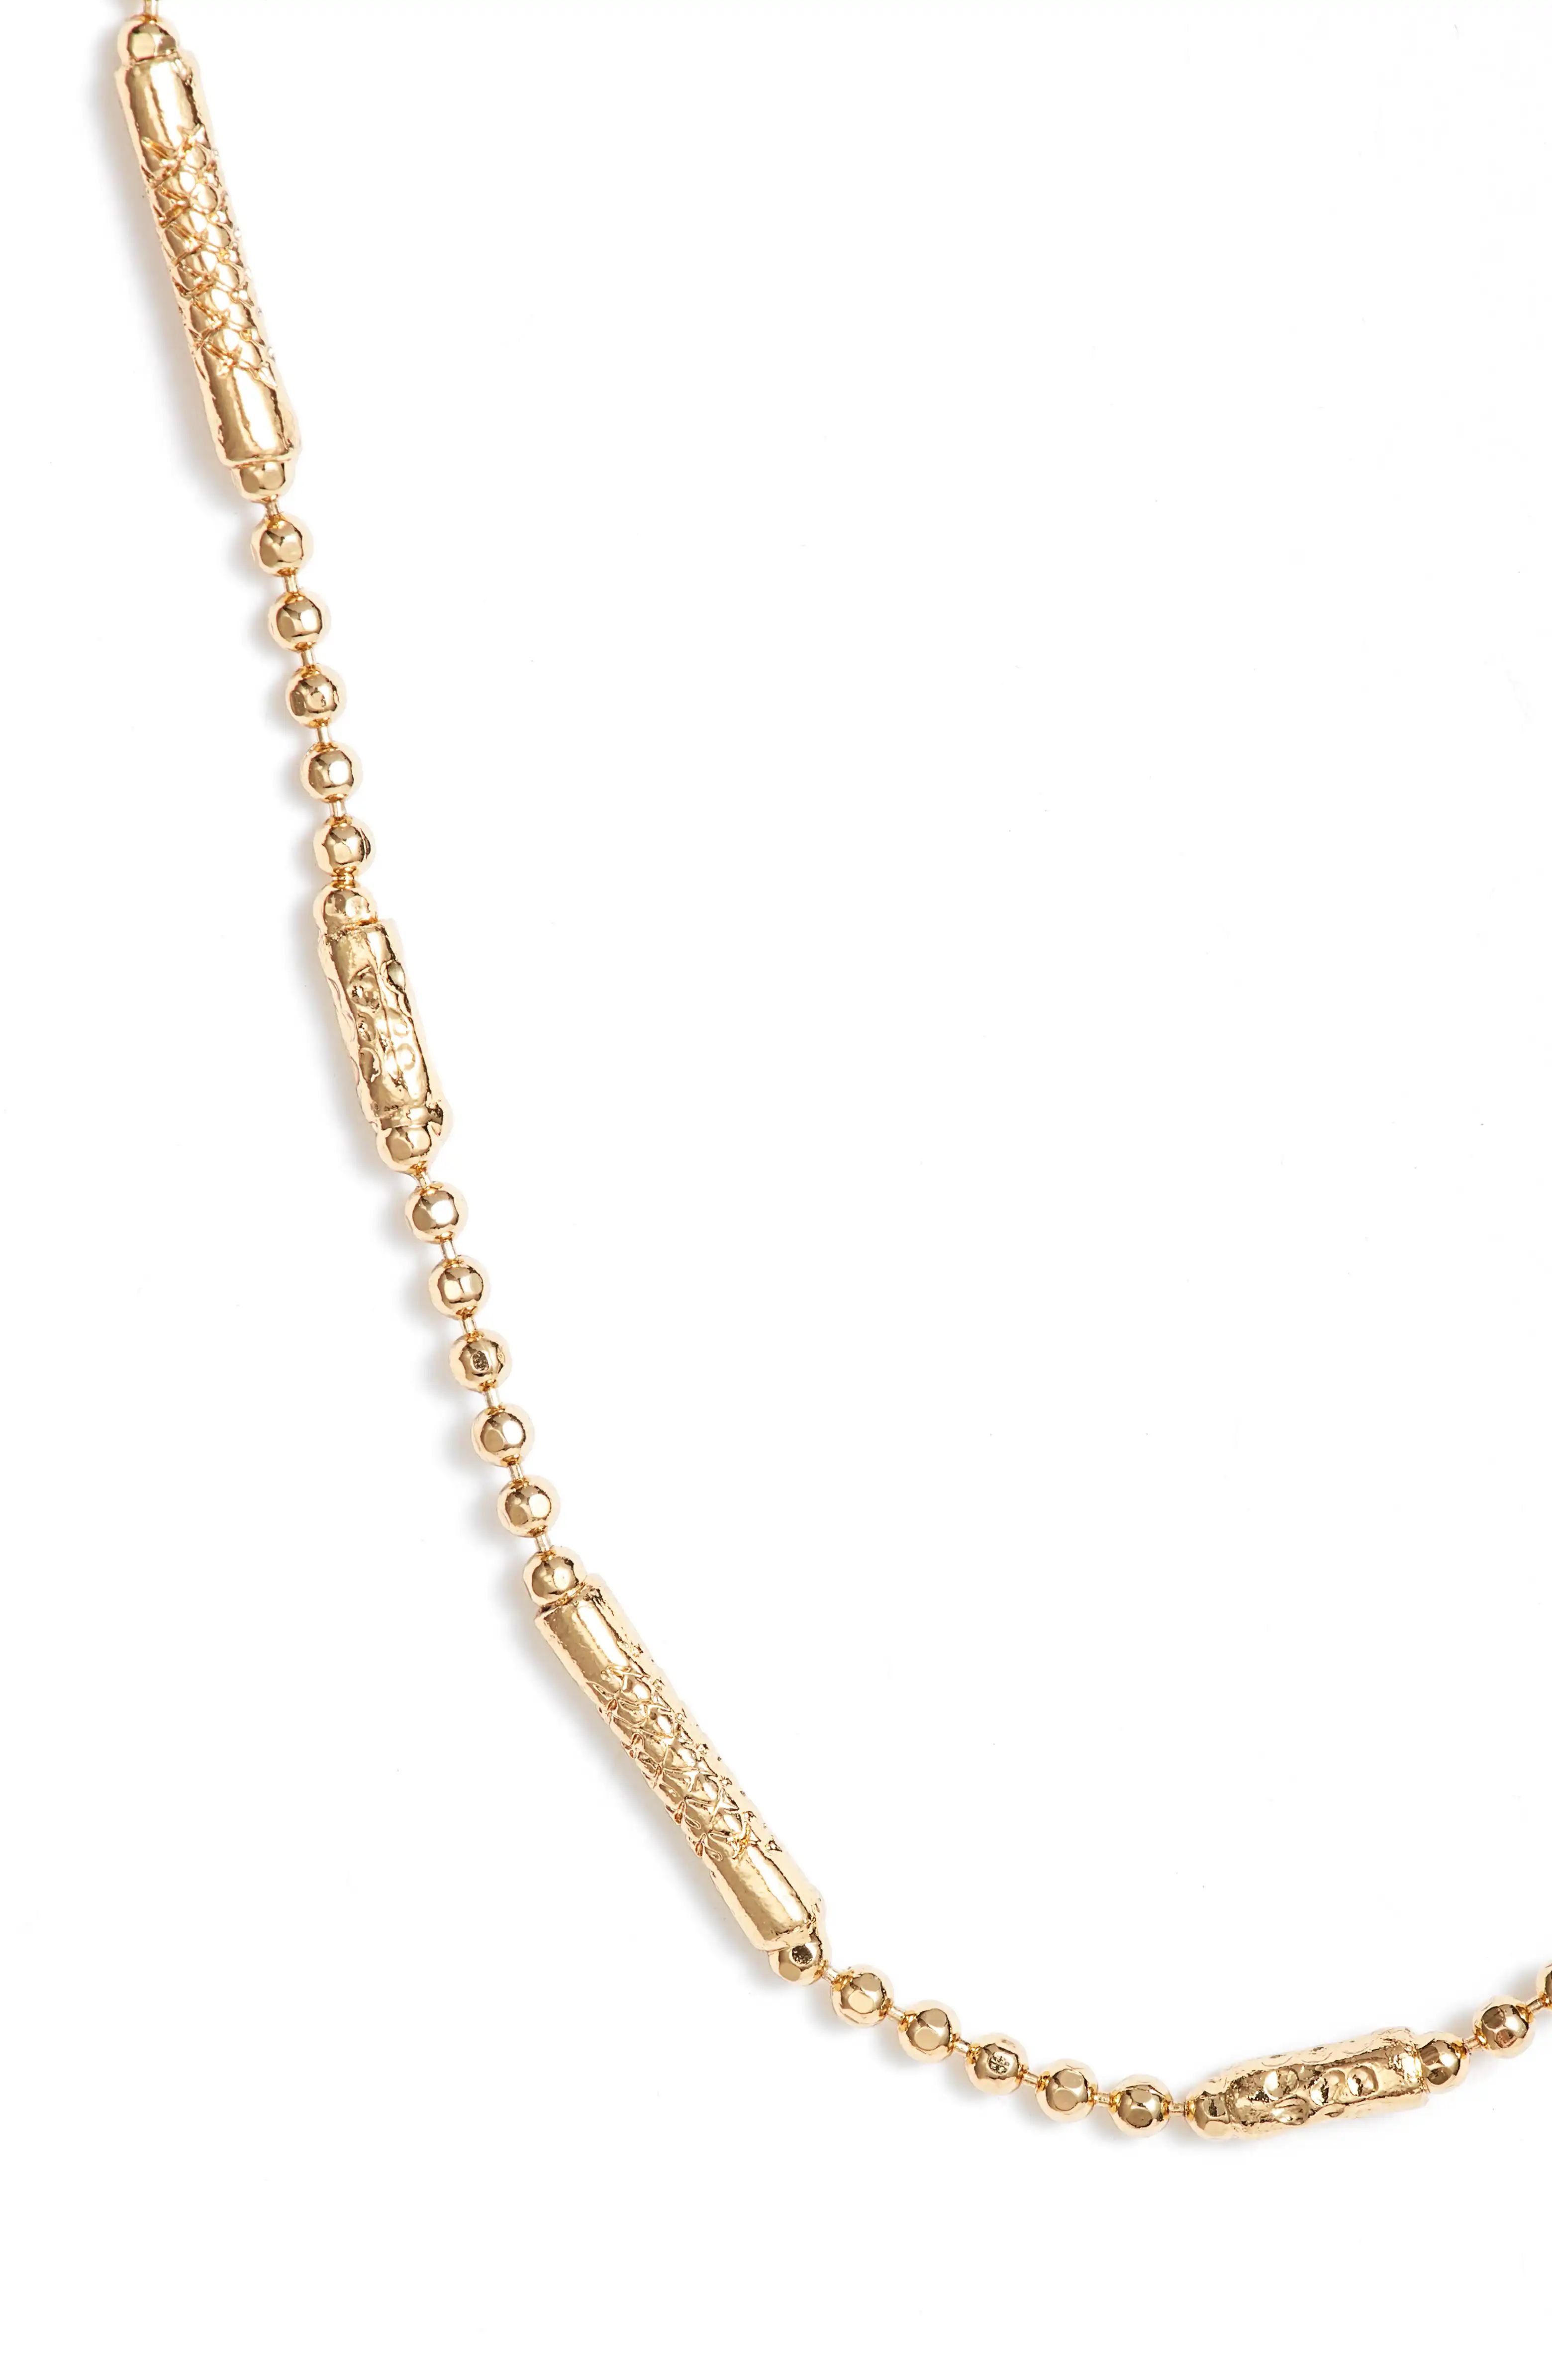 Ready to Mingle Necklace | Nordstrom